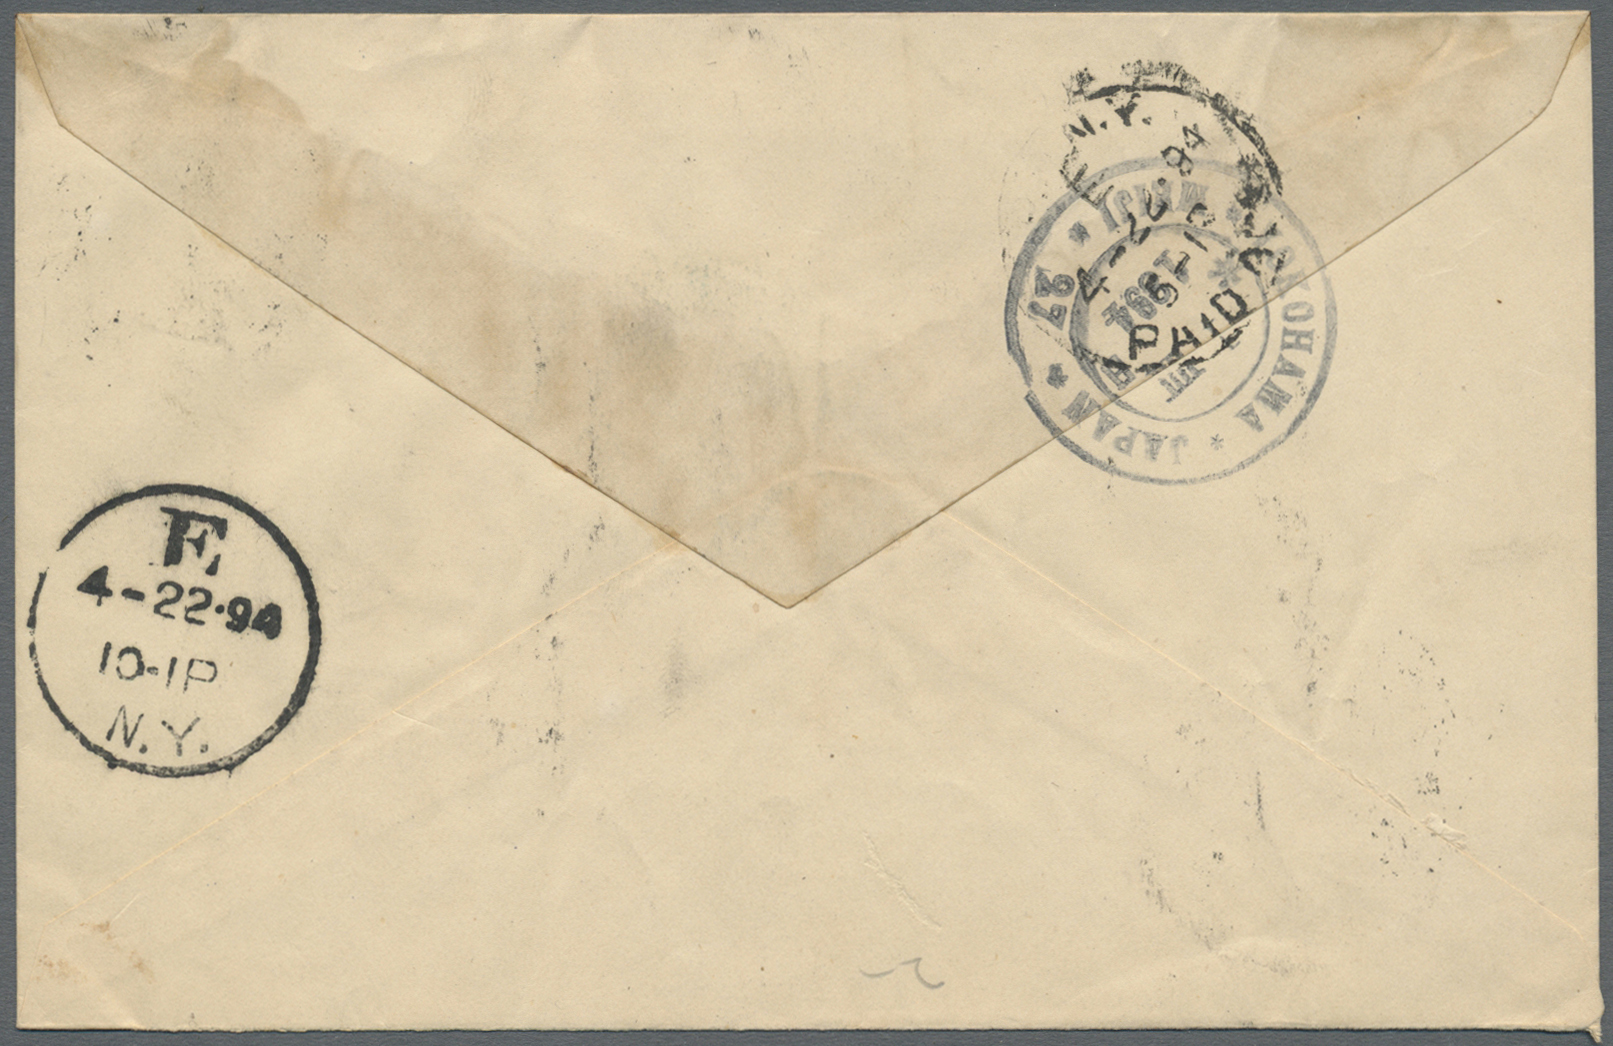 GA Japanische Post In China: 1888, Koban Envelope Small Size 2 S. Uprated Silver Wedding 2 S. And UPU Koban 1 S. (right - 1943-45 Shanghai & Nanjing